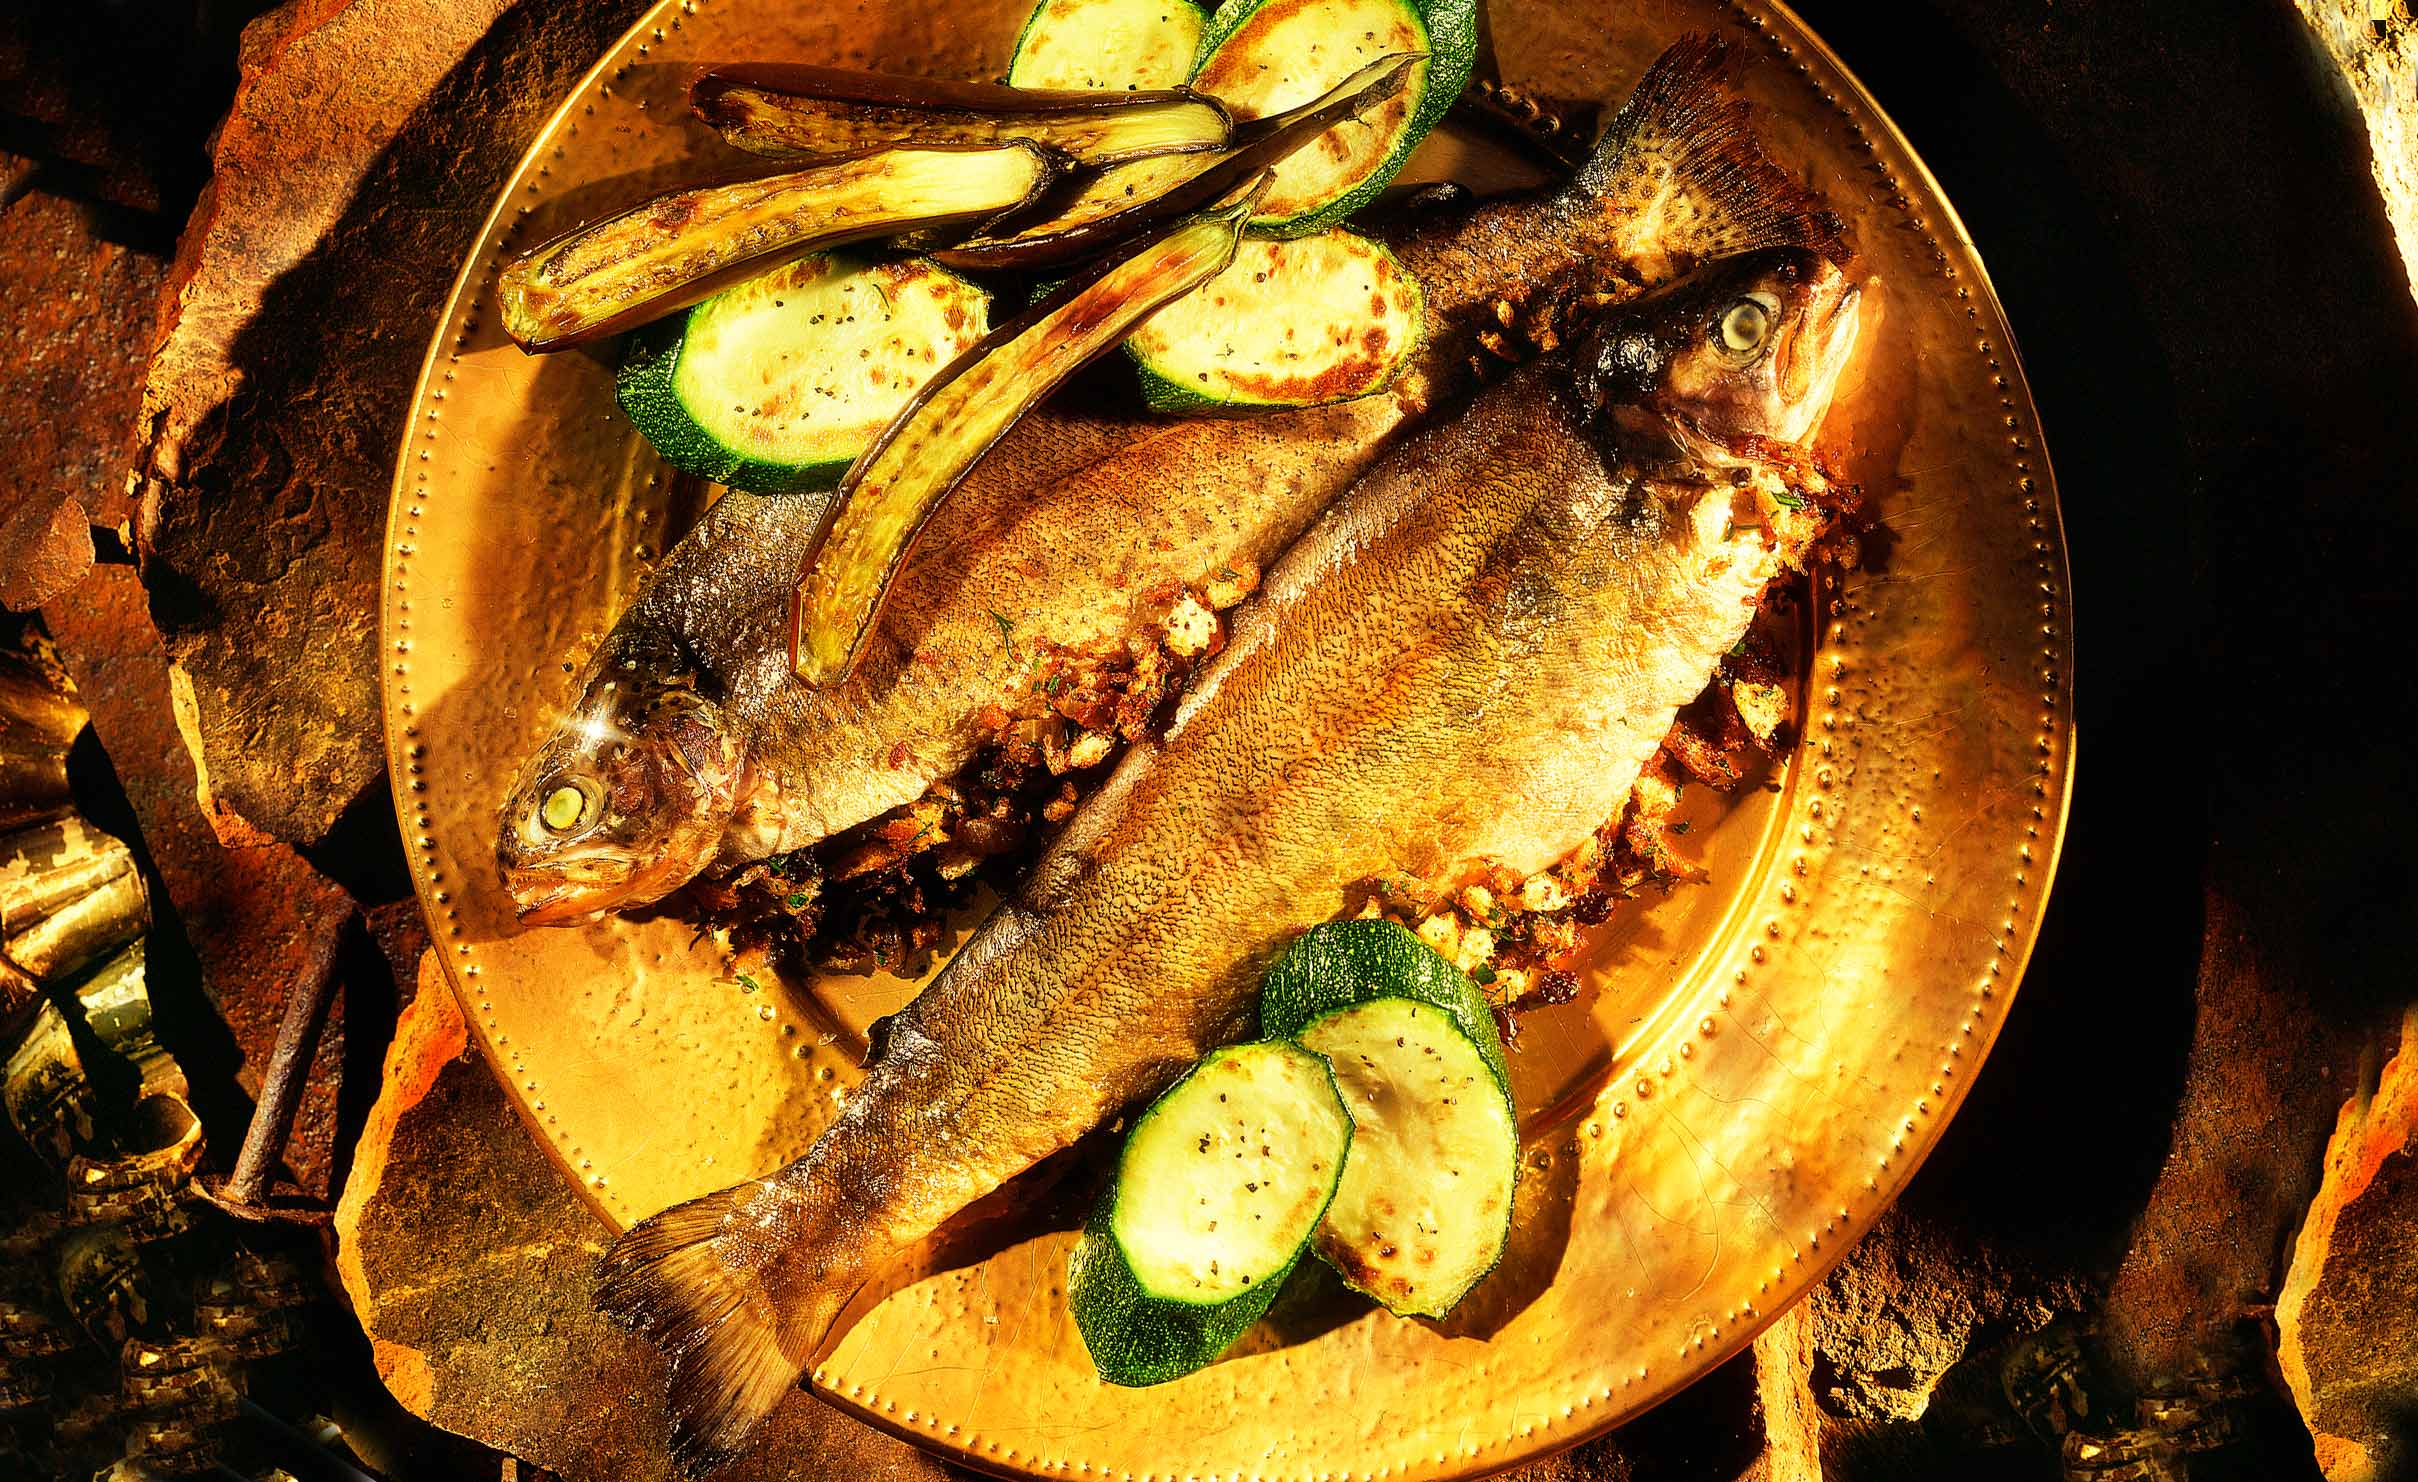 Roasted Trout on Gold Plate shot for Food and Wine magazine, Rick Ellis